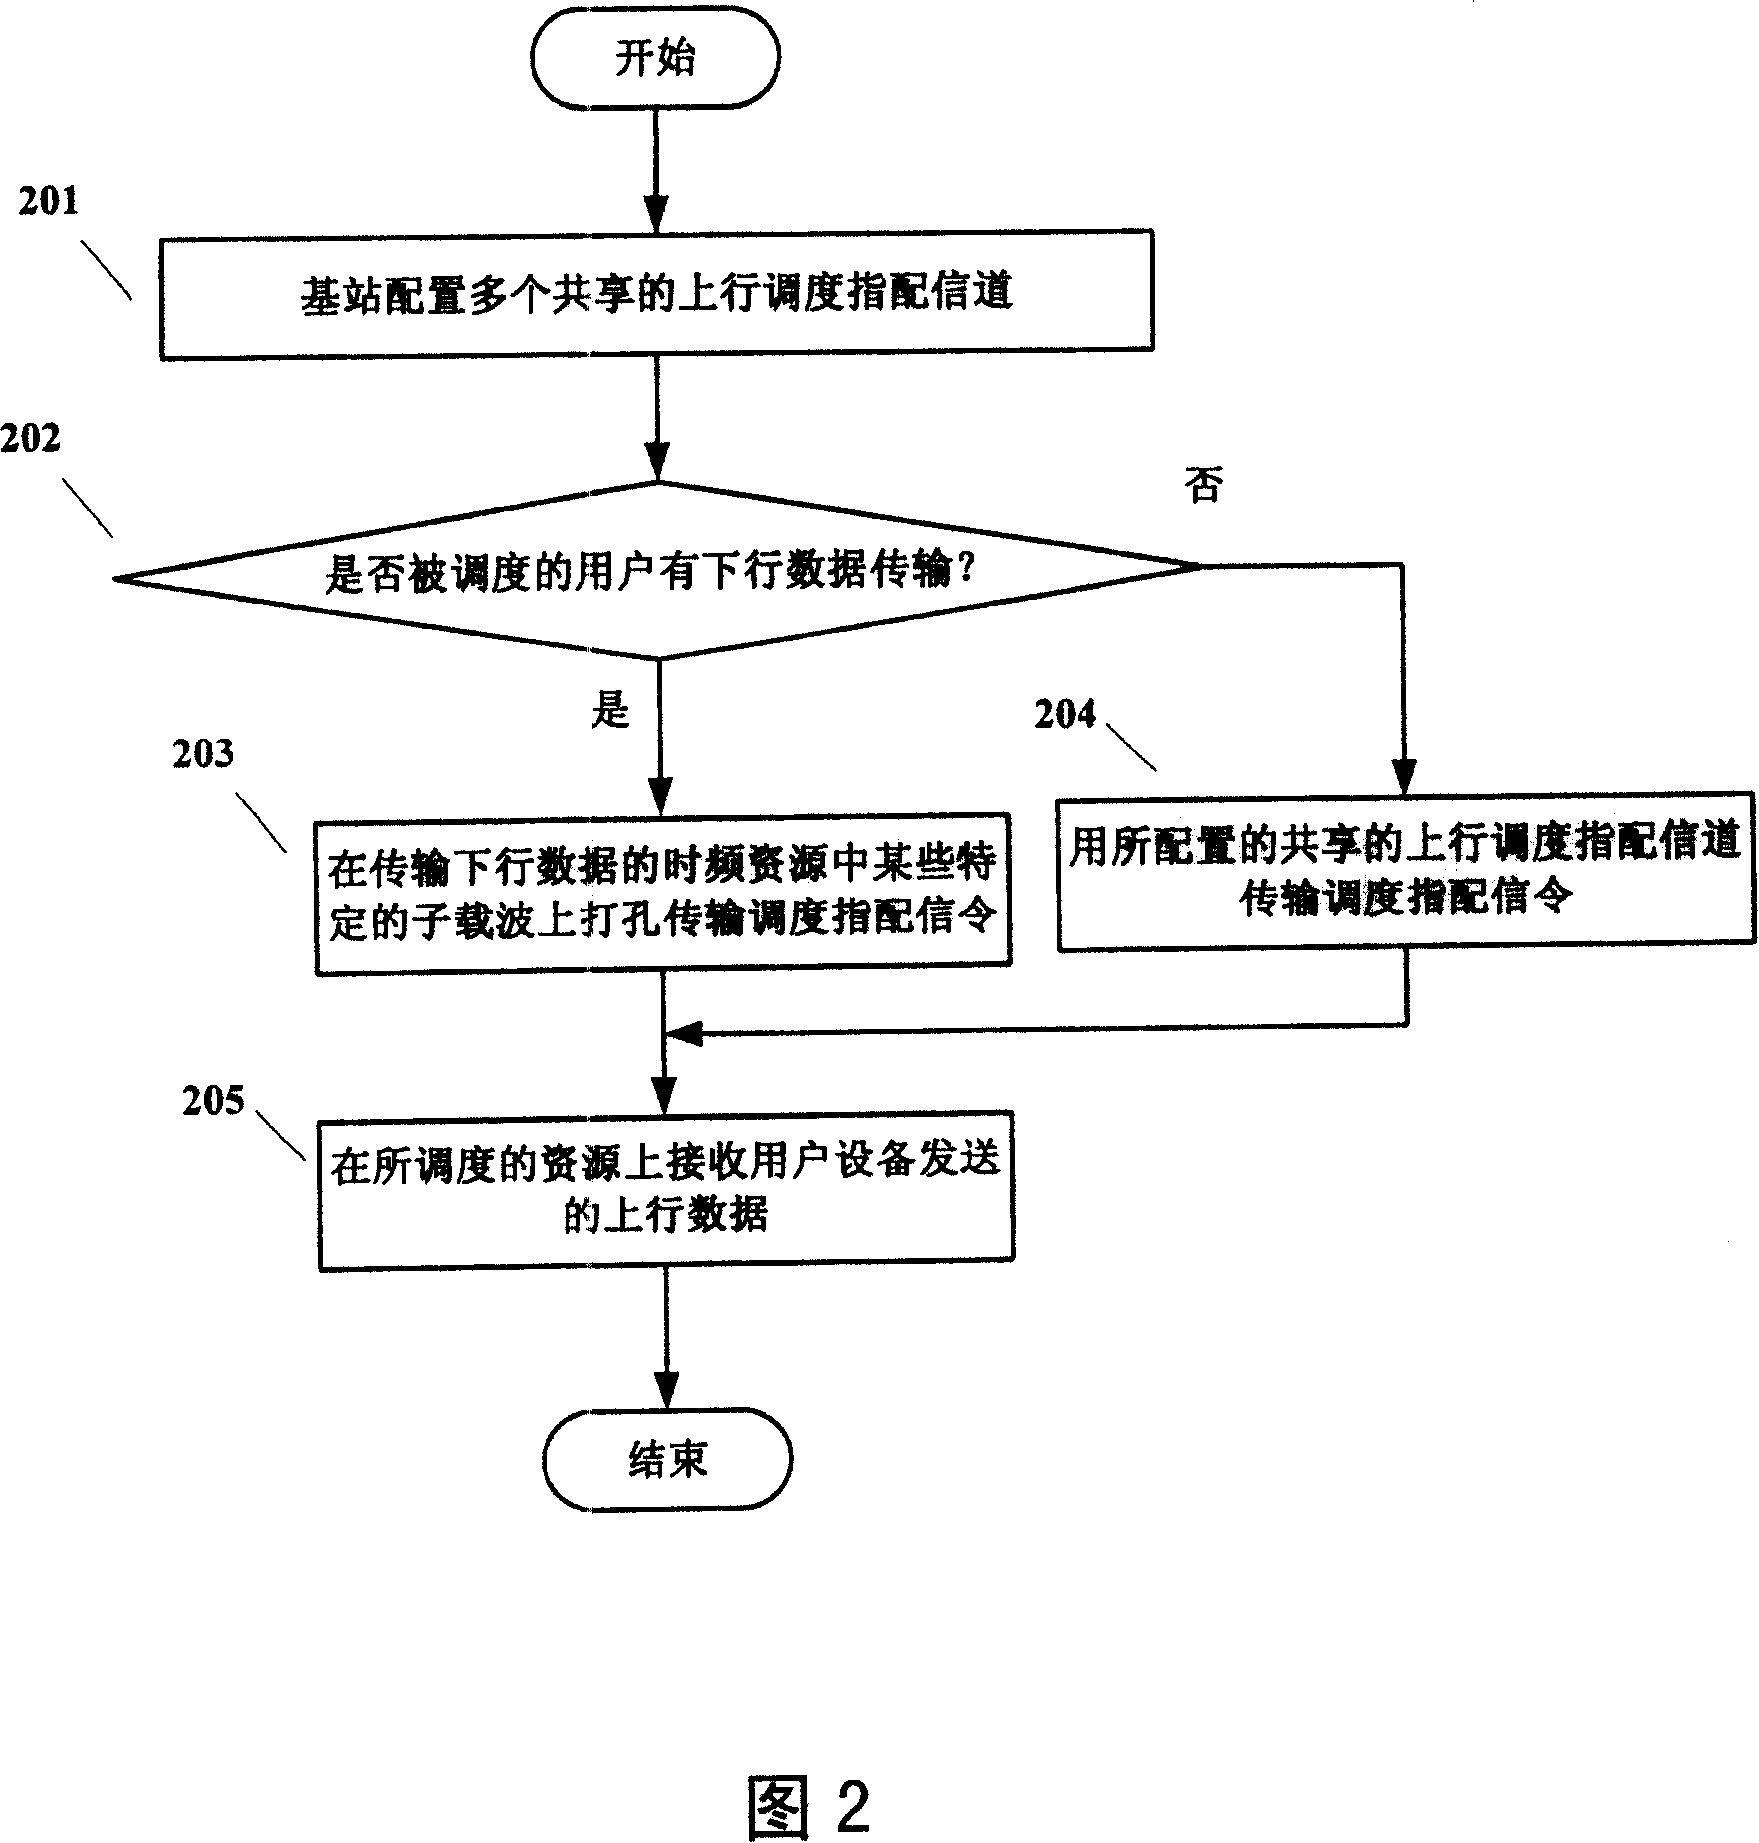 Transmission method and device for ascending scheduling assignment